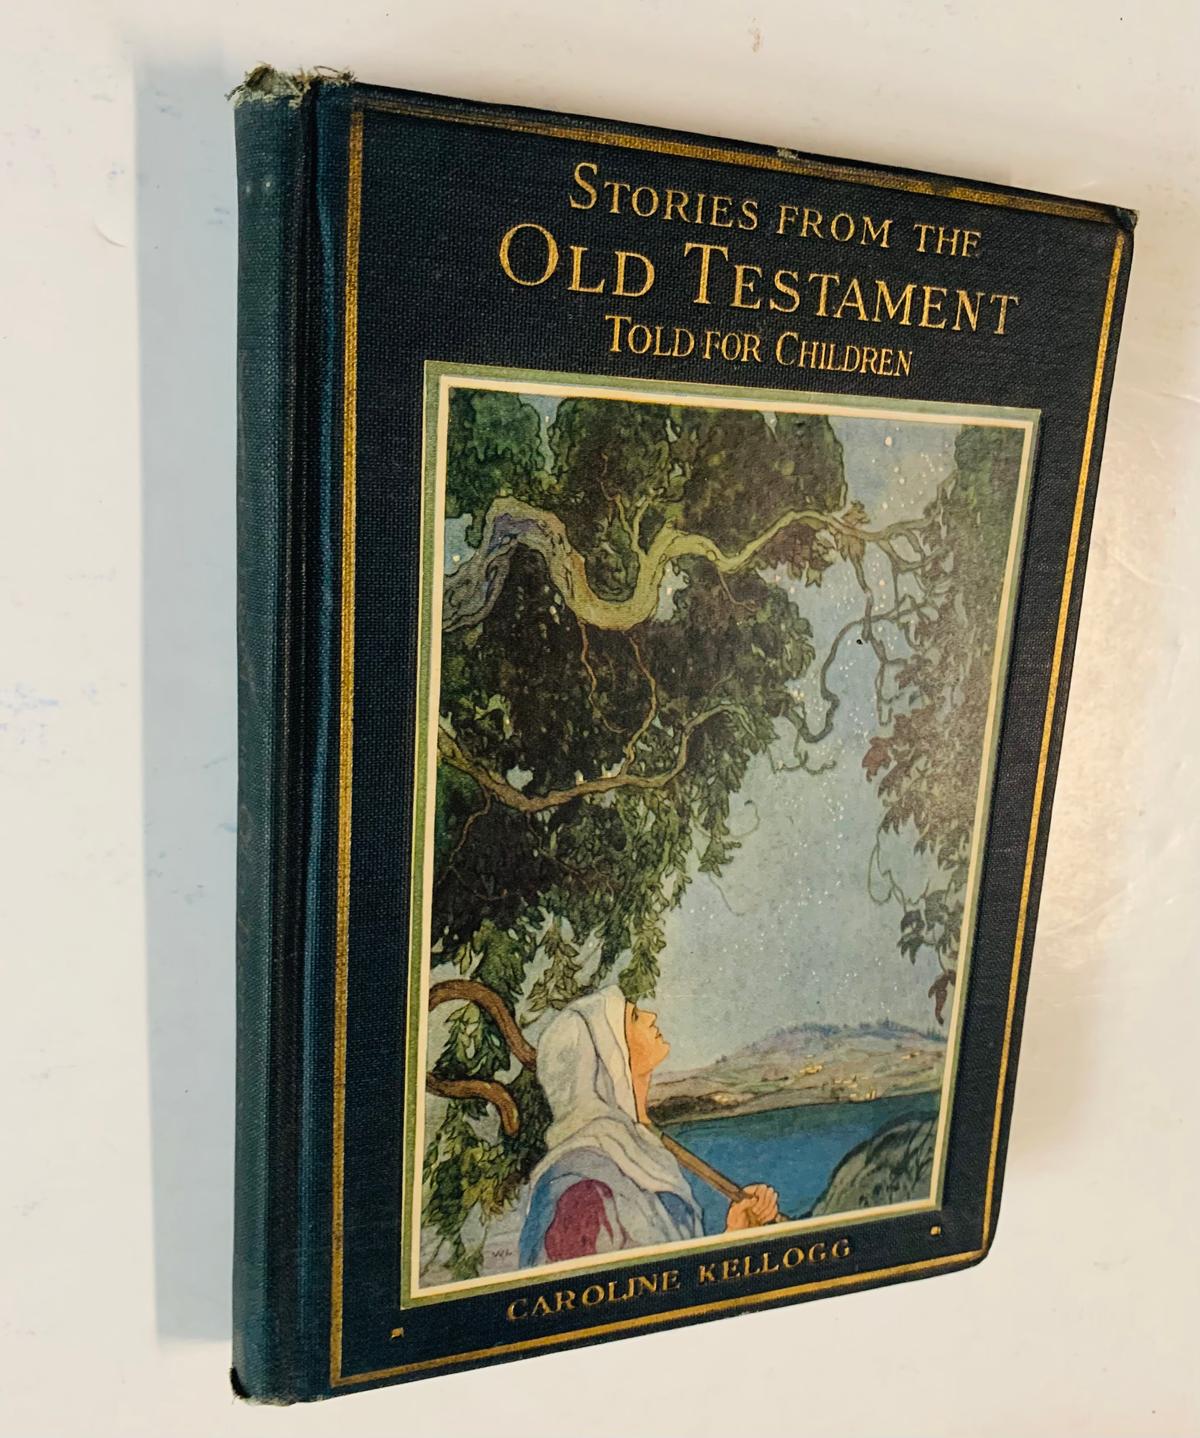 Stories from the Old Testament by Caroline Kellogg (1922) Told for CHILDREN